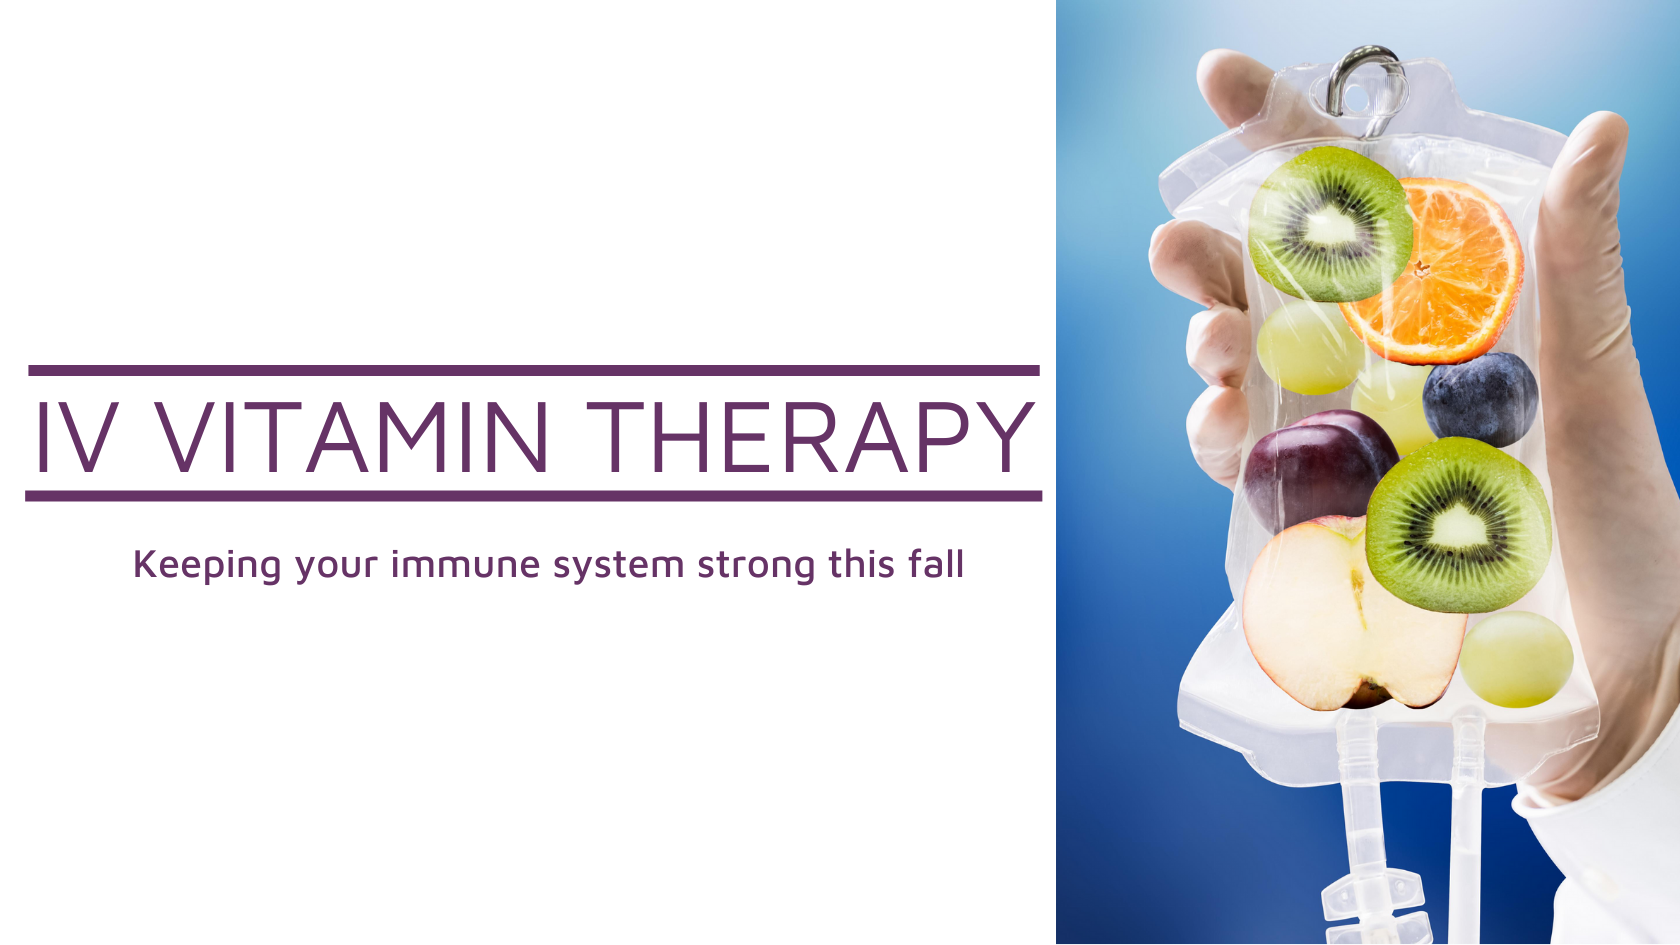 ﻿IV Vitamin Therapy – Keeping your immune system strong